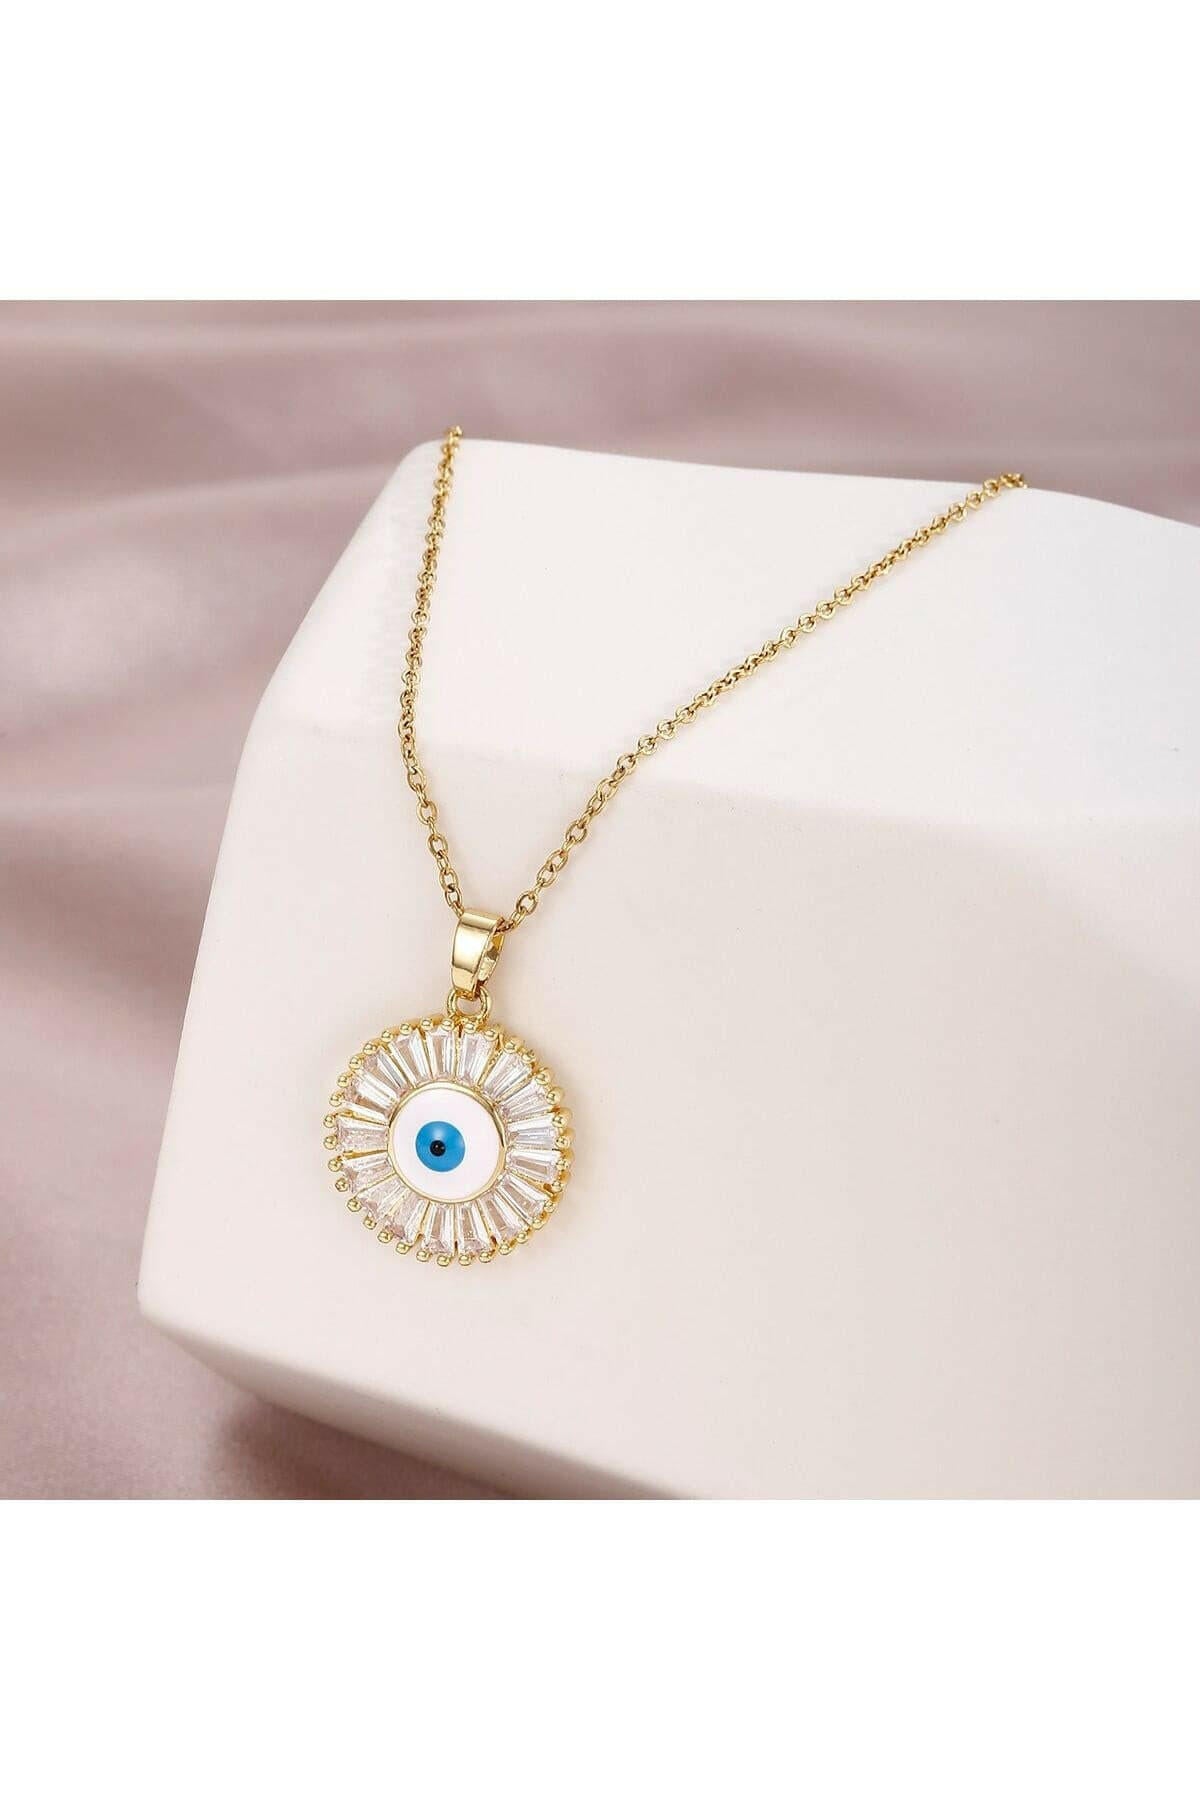 Stainless Steel Turkish Crystal Evil Eyes Pendant Necklace For Women.